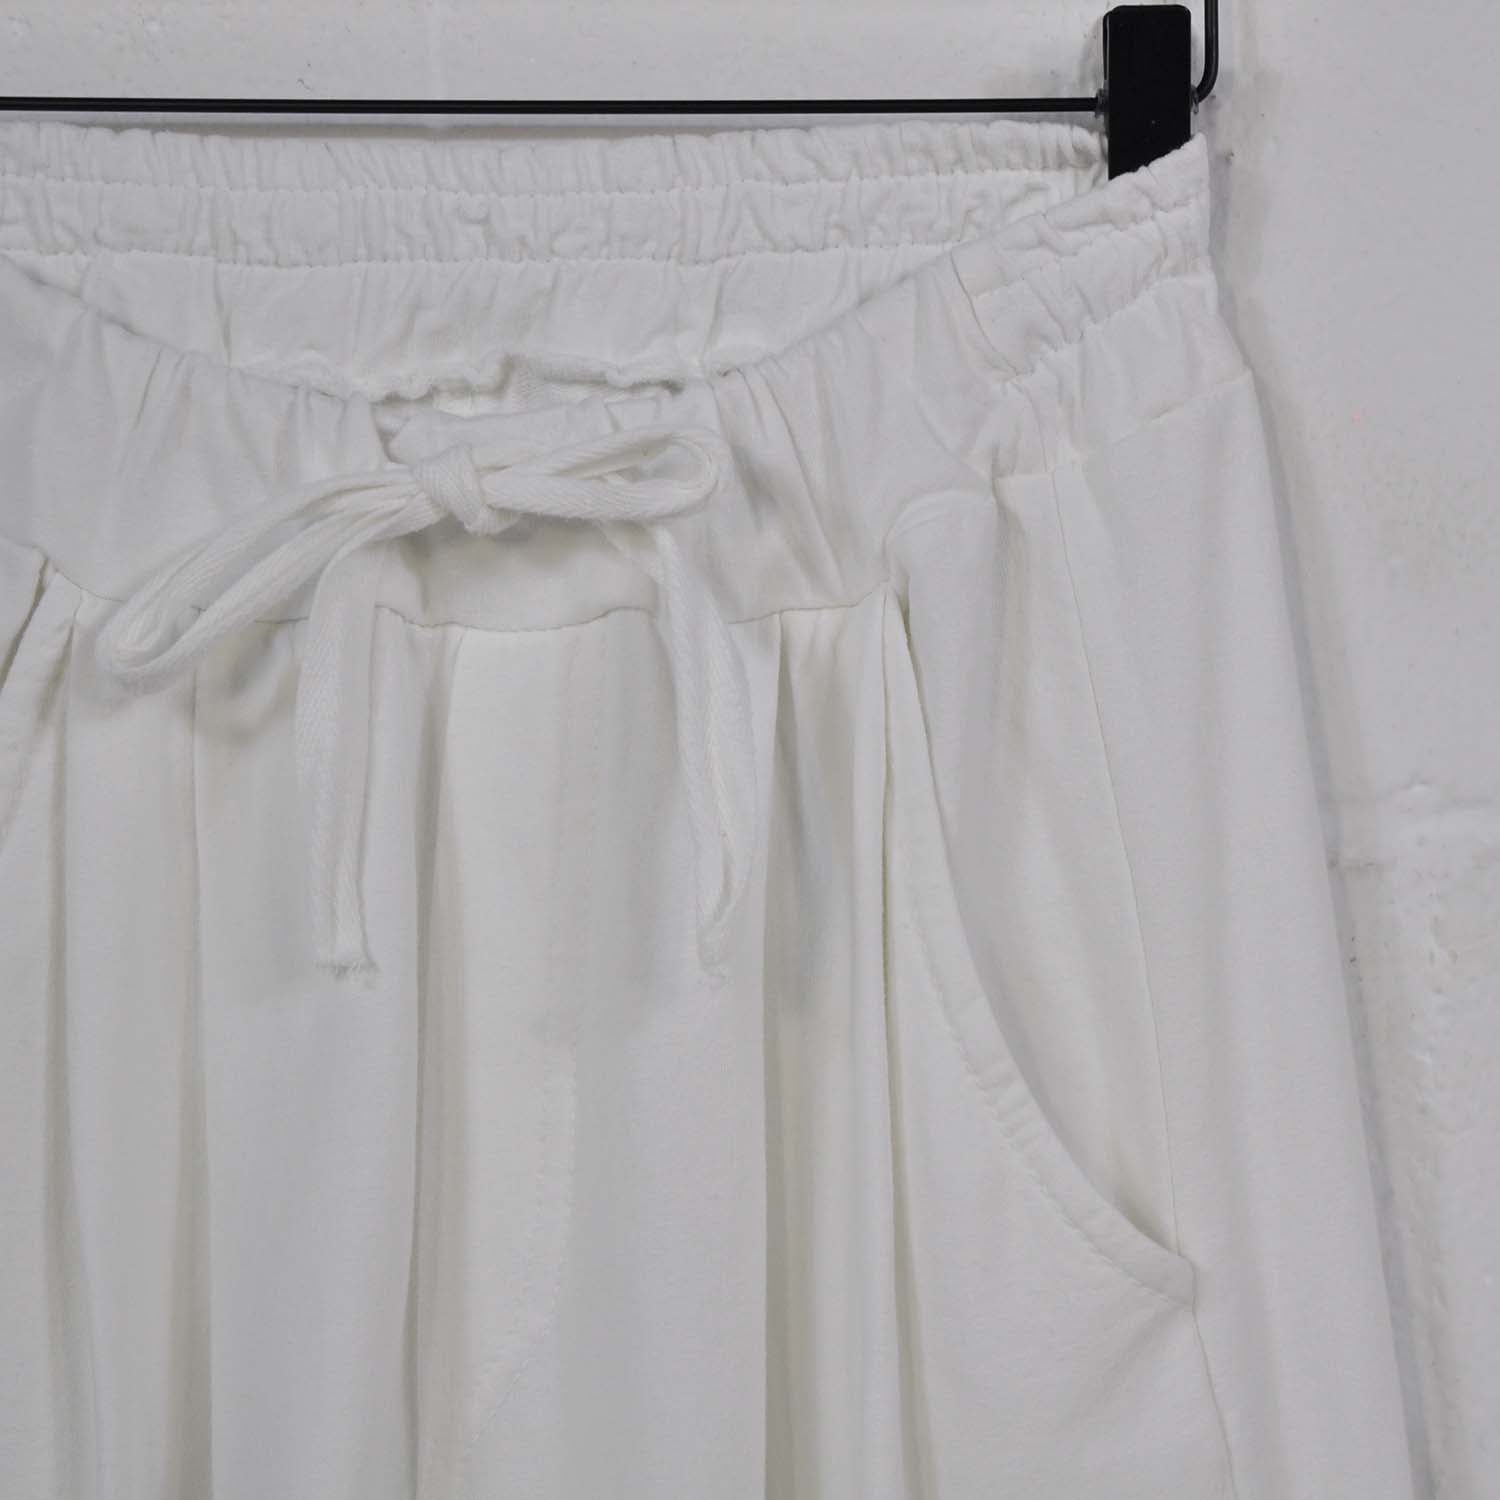 White pleated pants